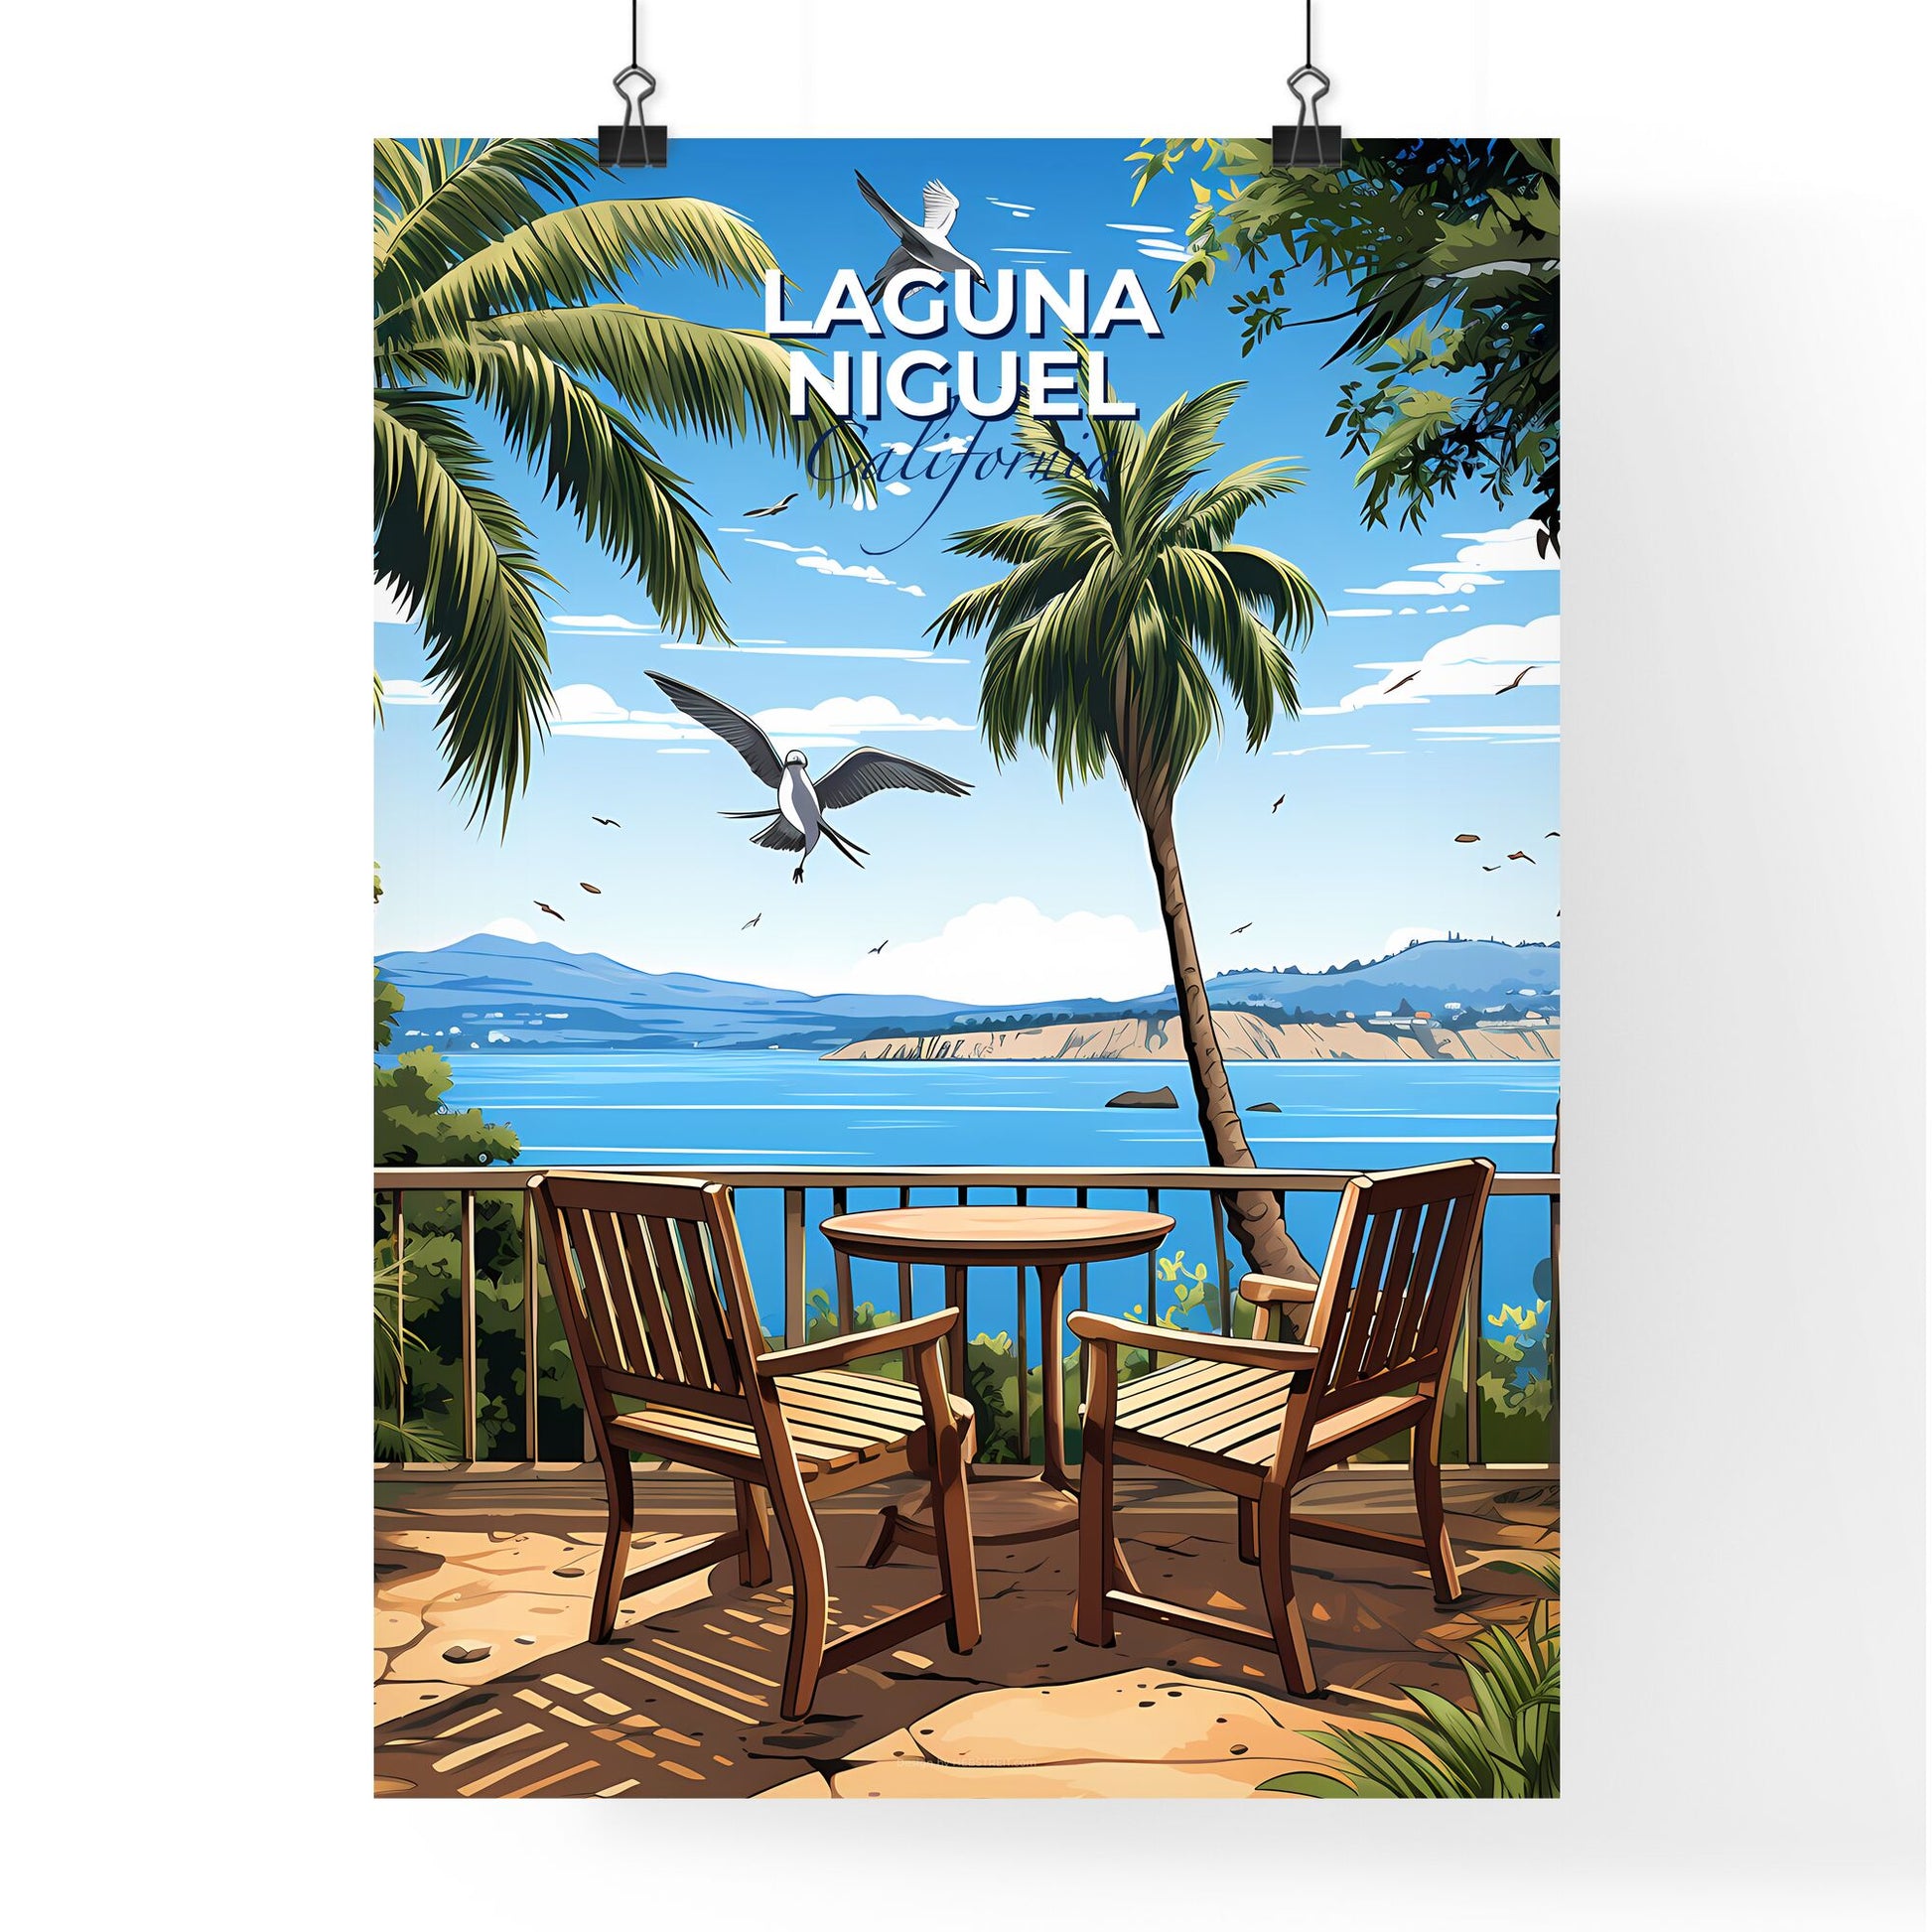 Laguna Niguel, California, A Poster of a deck with chairs and table and a bird flying over the water Default Title